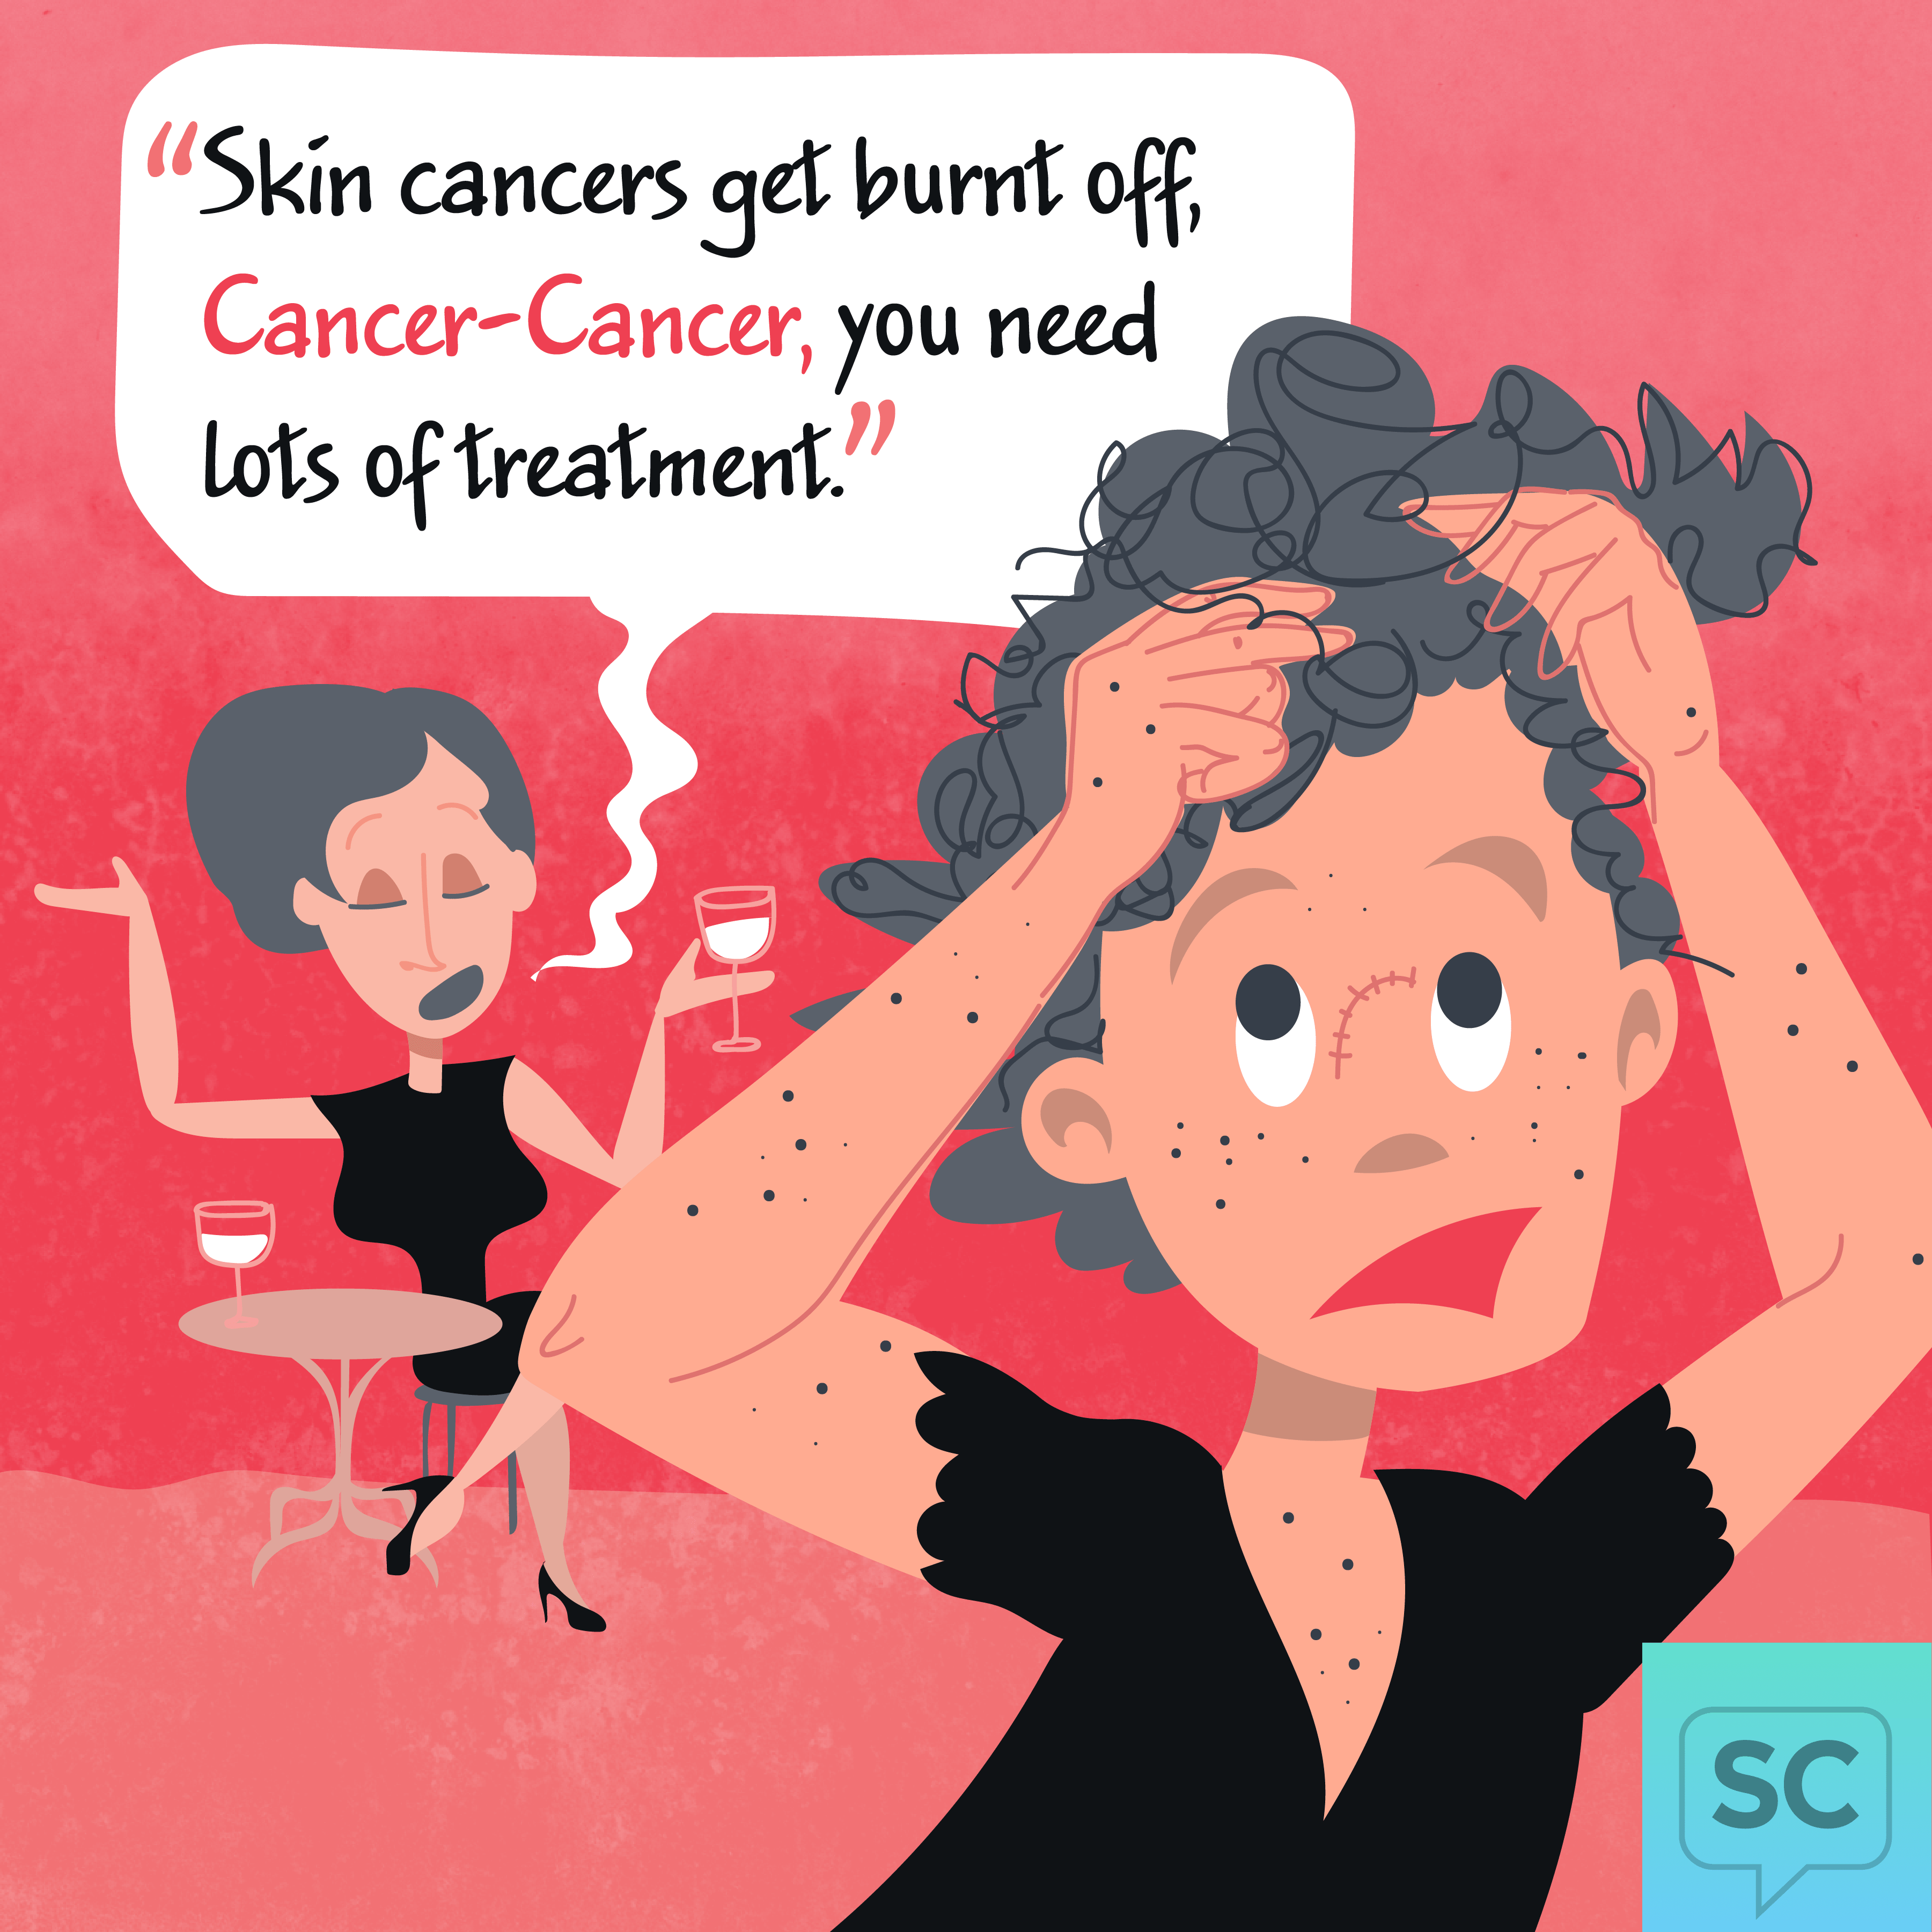 One woman tells another that skin cancer is not cancer-cancer